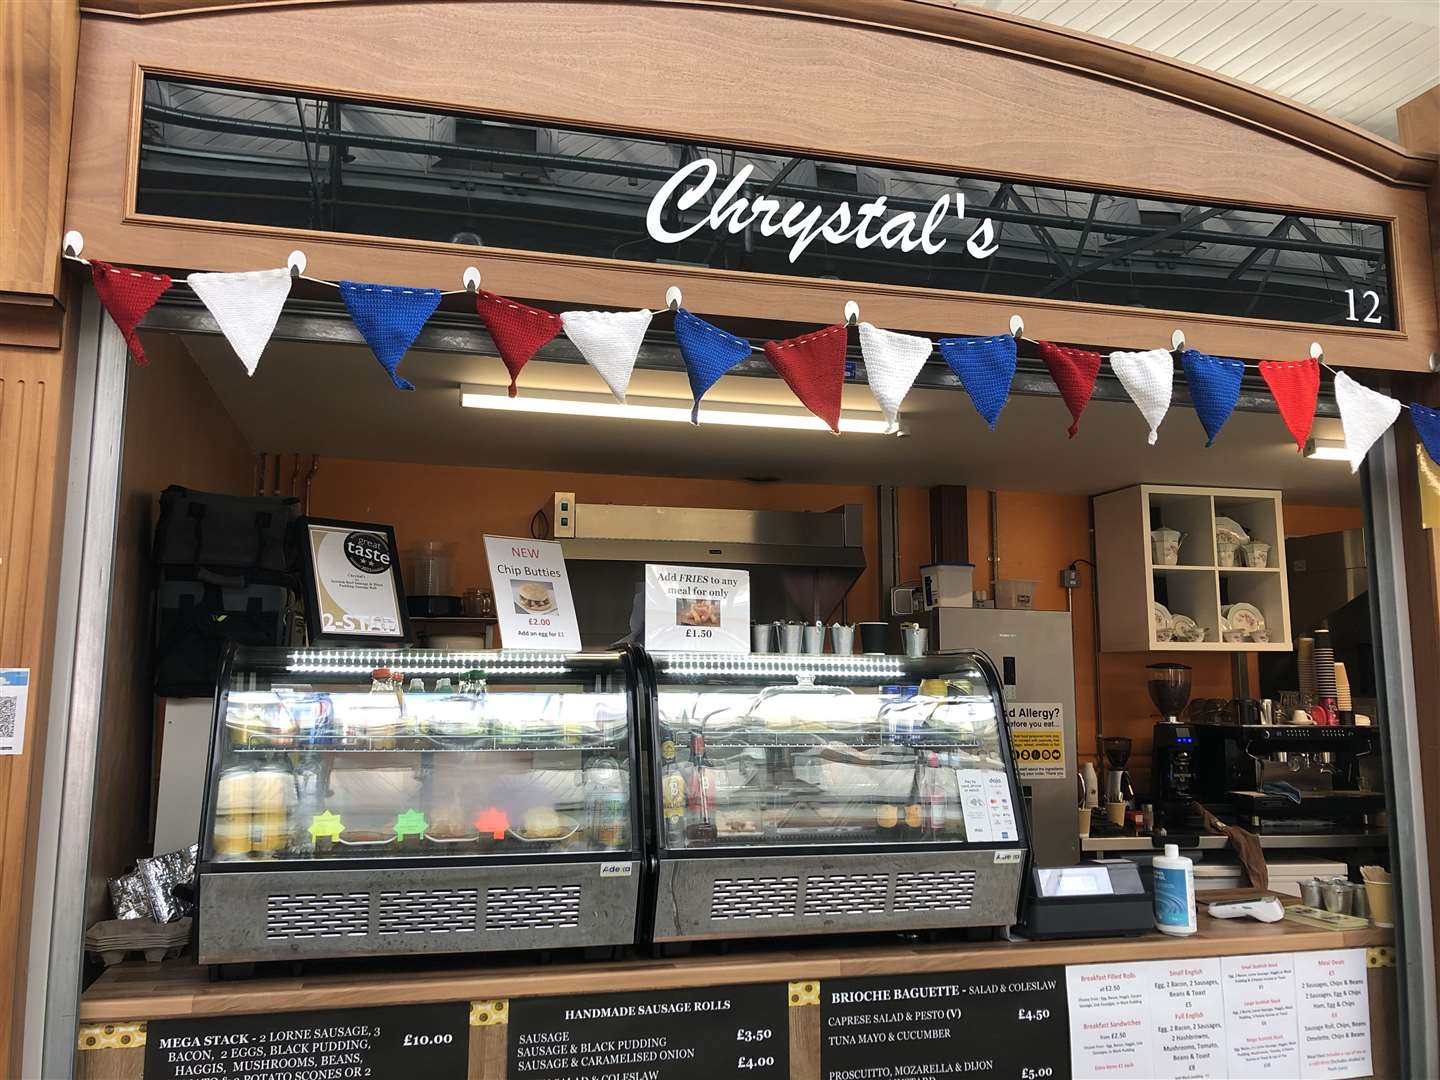 Chrystal's aims to bring unique combinations of Scottish and British food